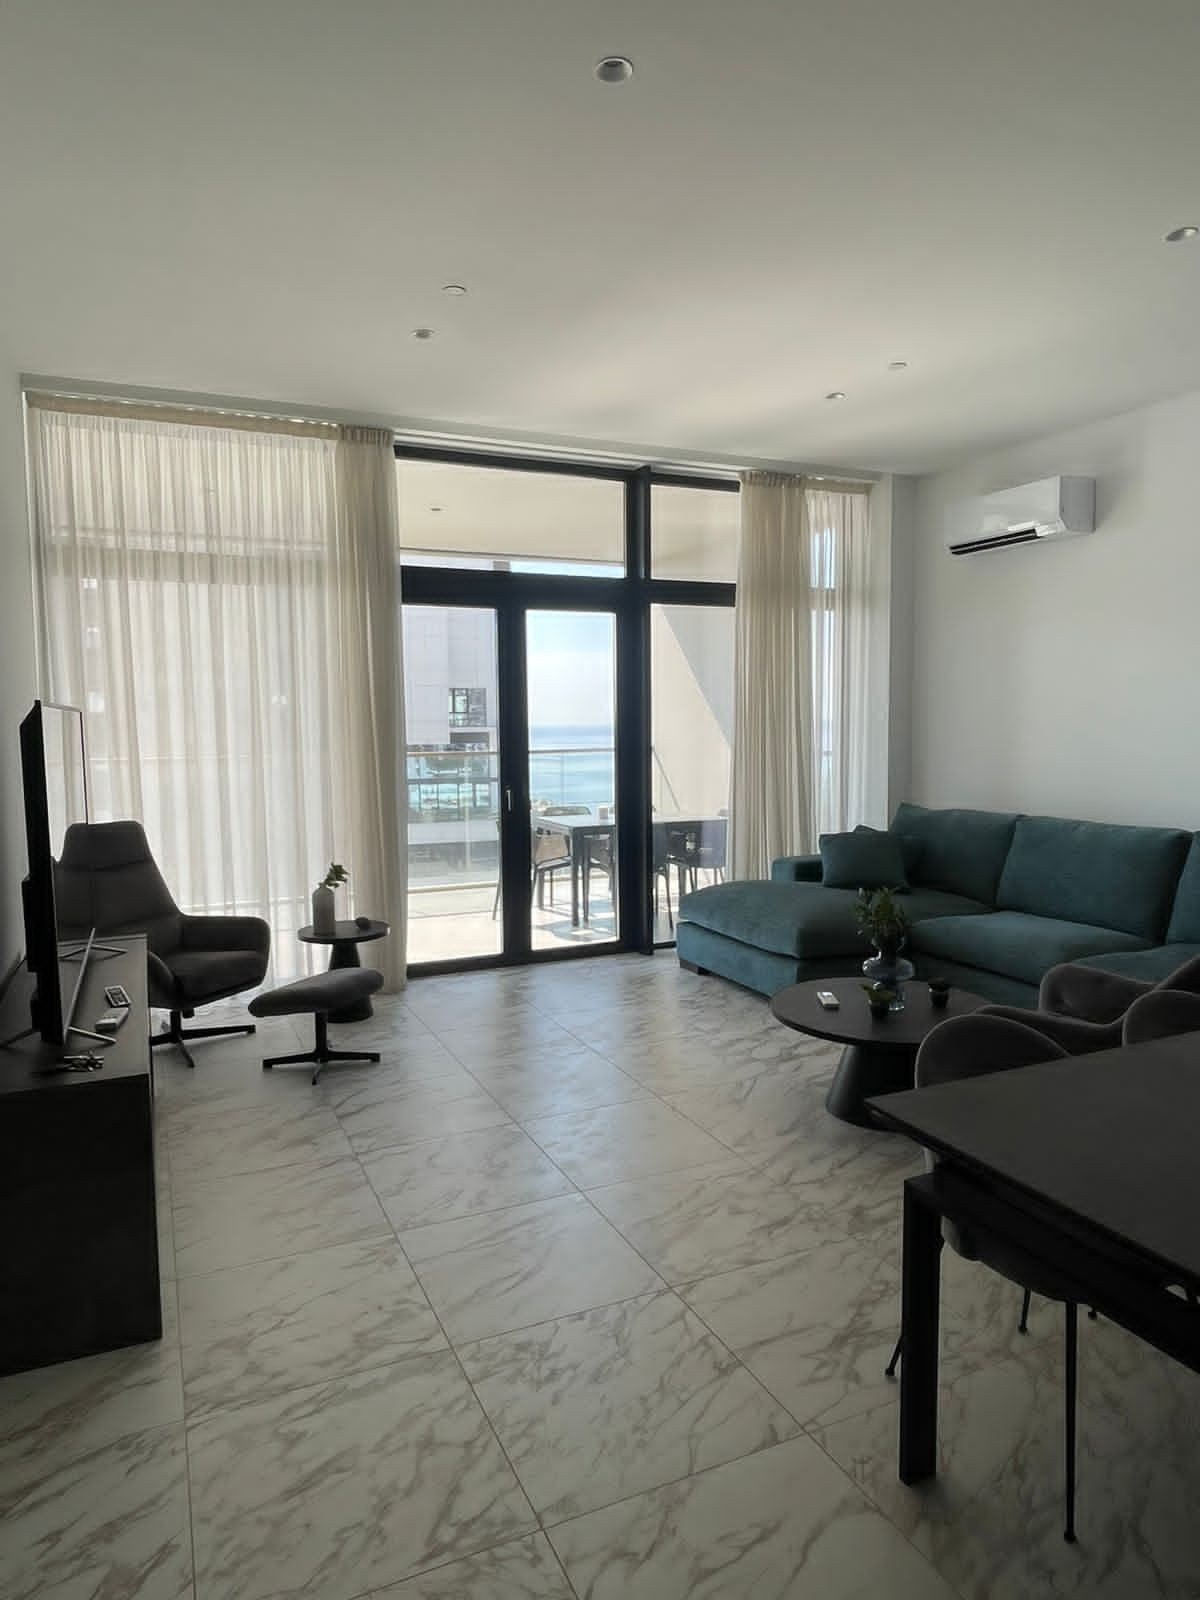 Property for Rent: Apartment (Flat) in Germasoyia Tourist Area, Limassol for Rent | Key Realtor Cyprus